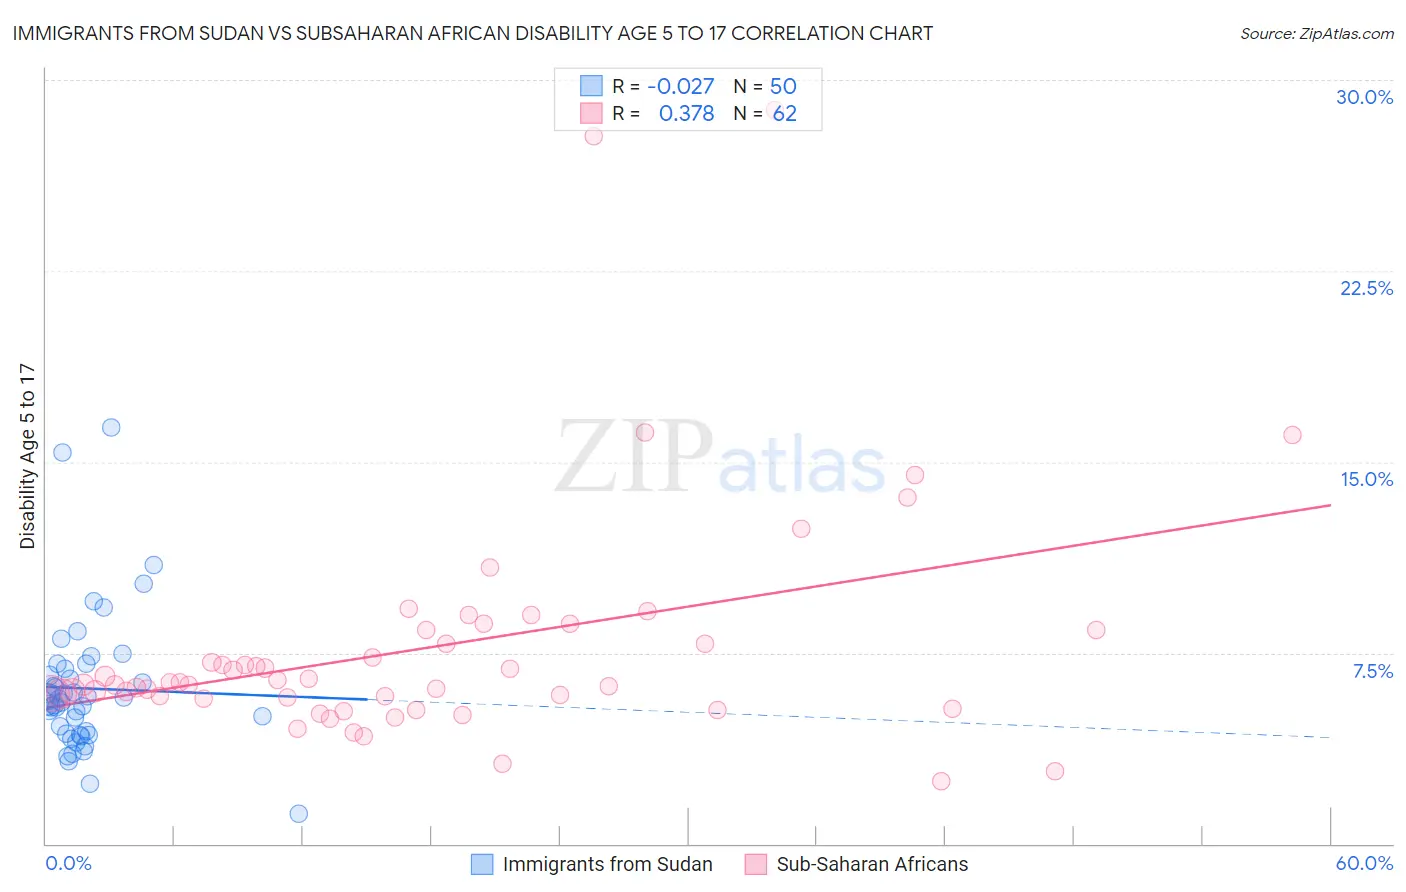 Immigrants from Sudan vs Subsaharan African Disability Age 5 to 17